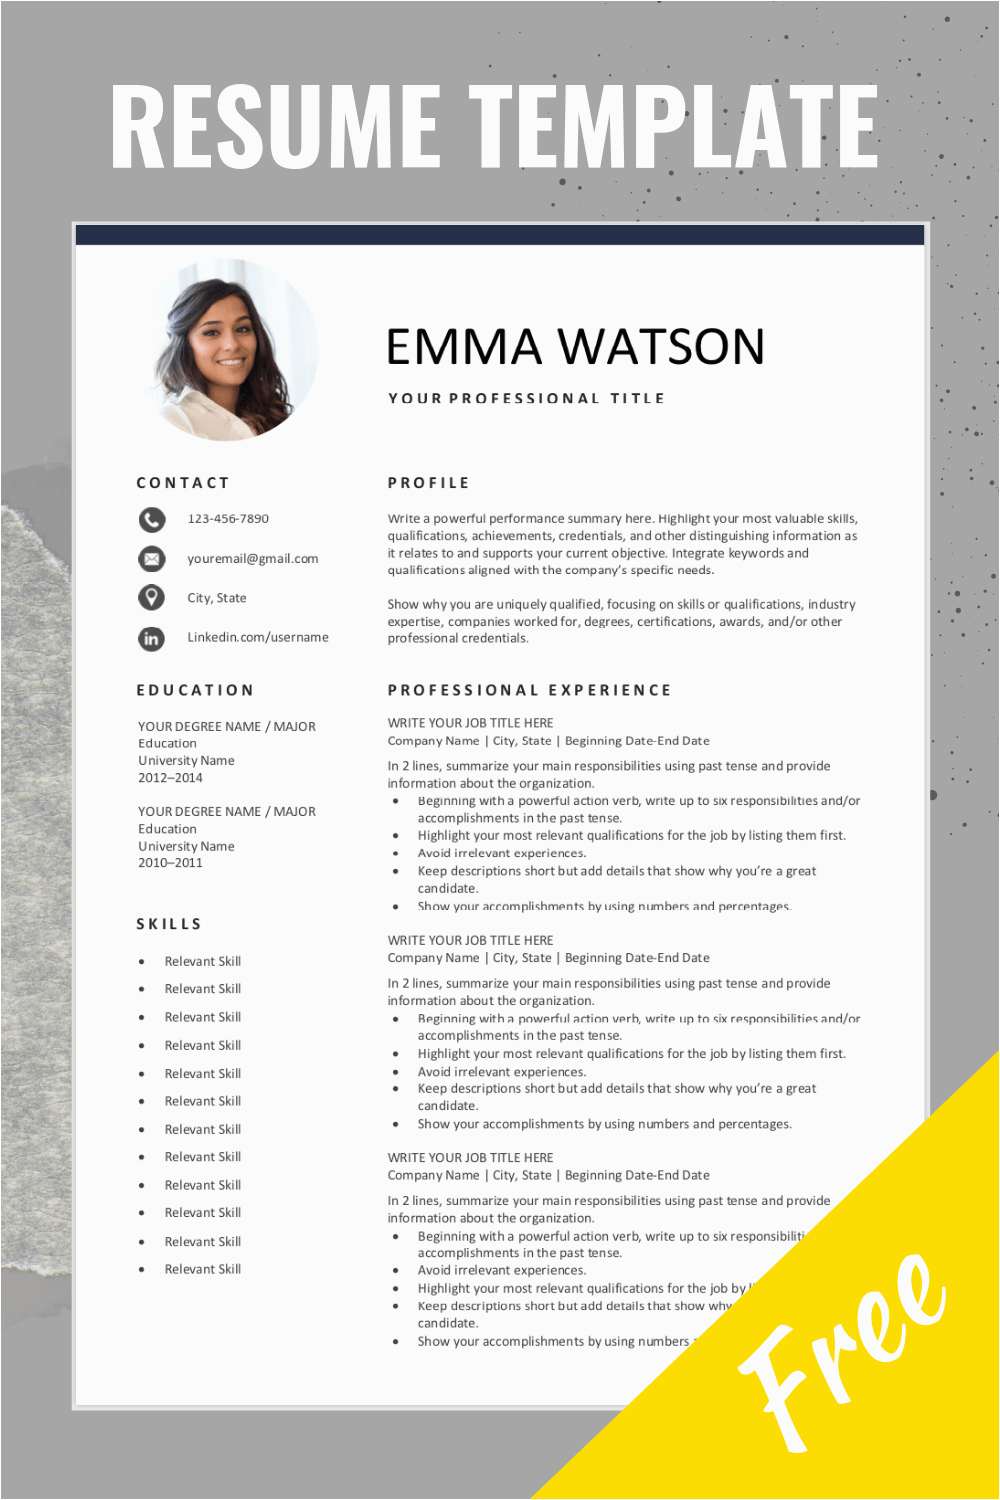 Free Resume Template with Photo Download Resume Template Free Editable Layout are You Looking